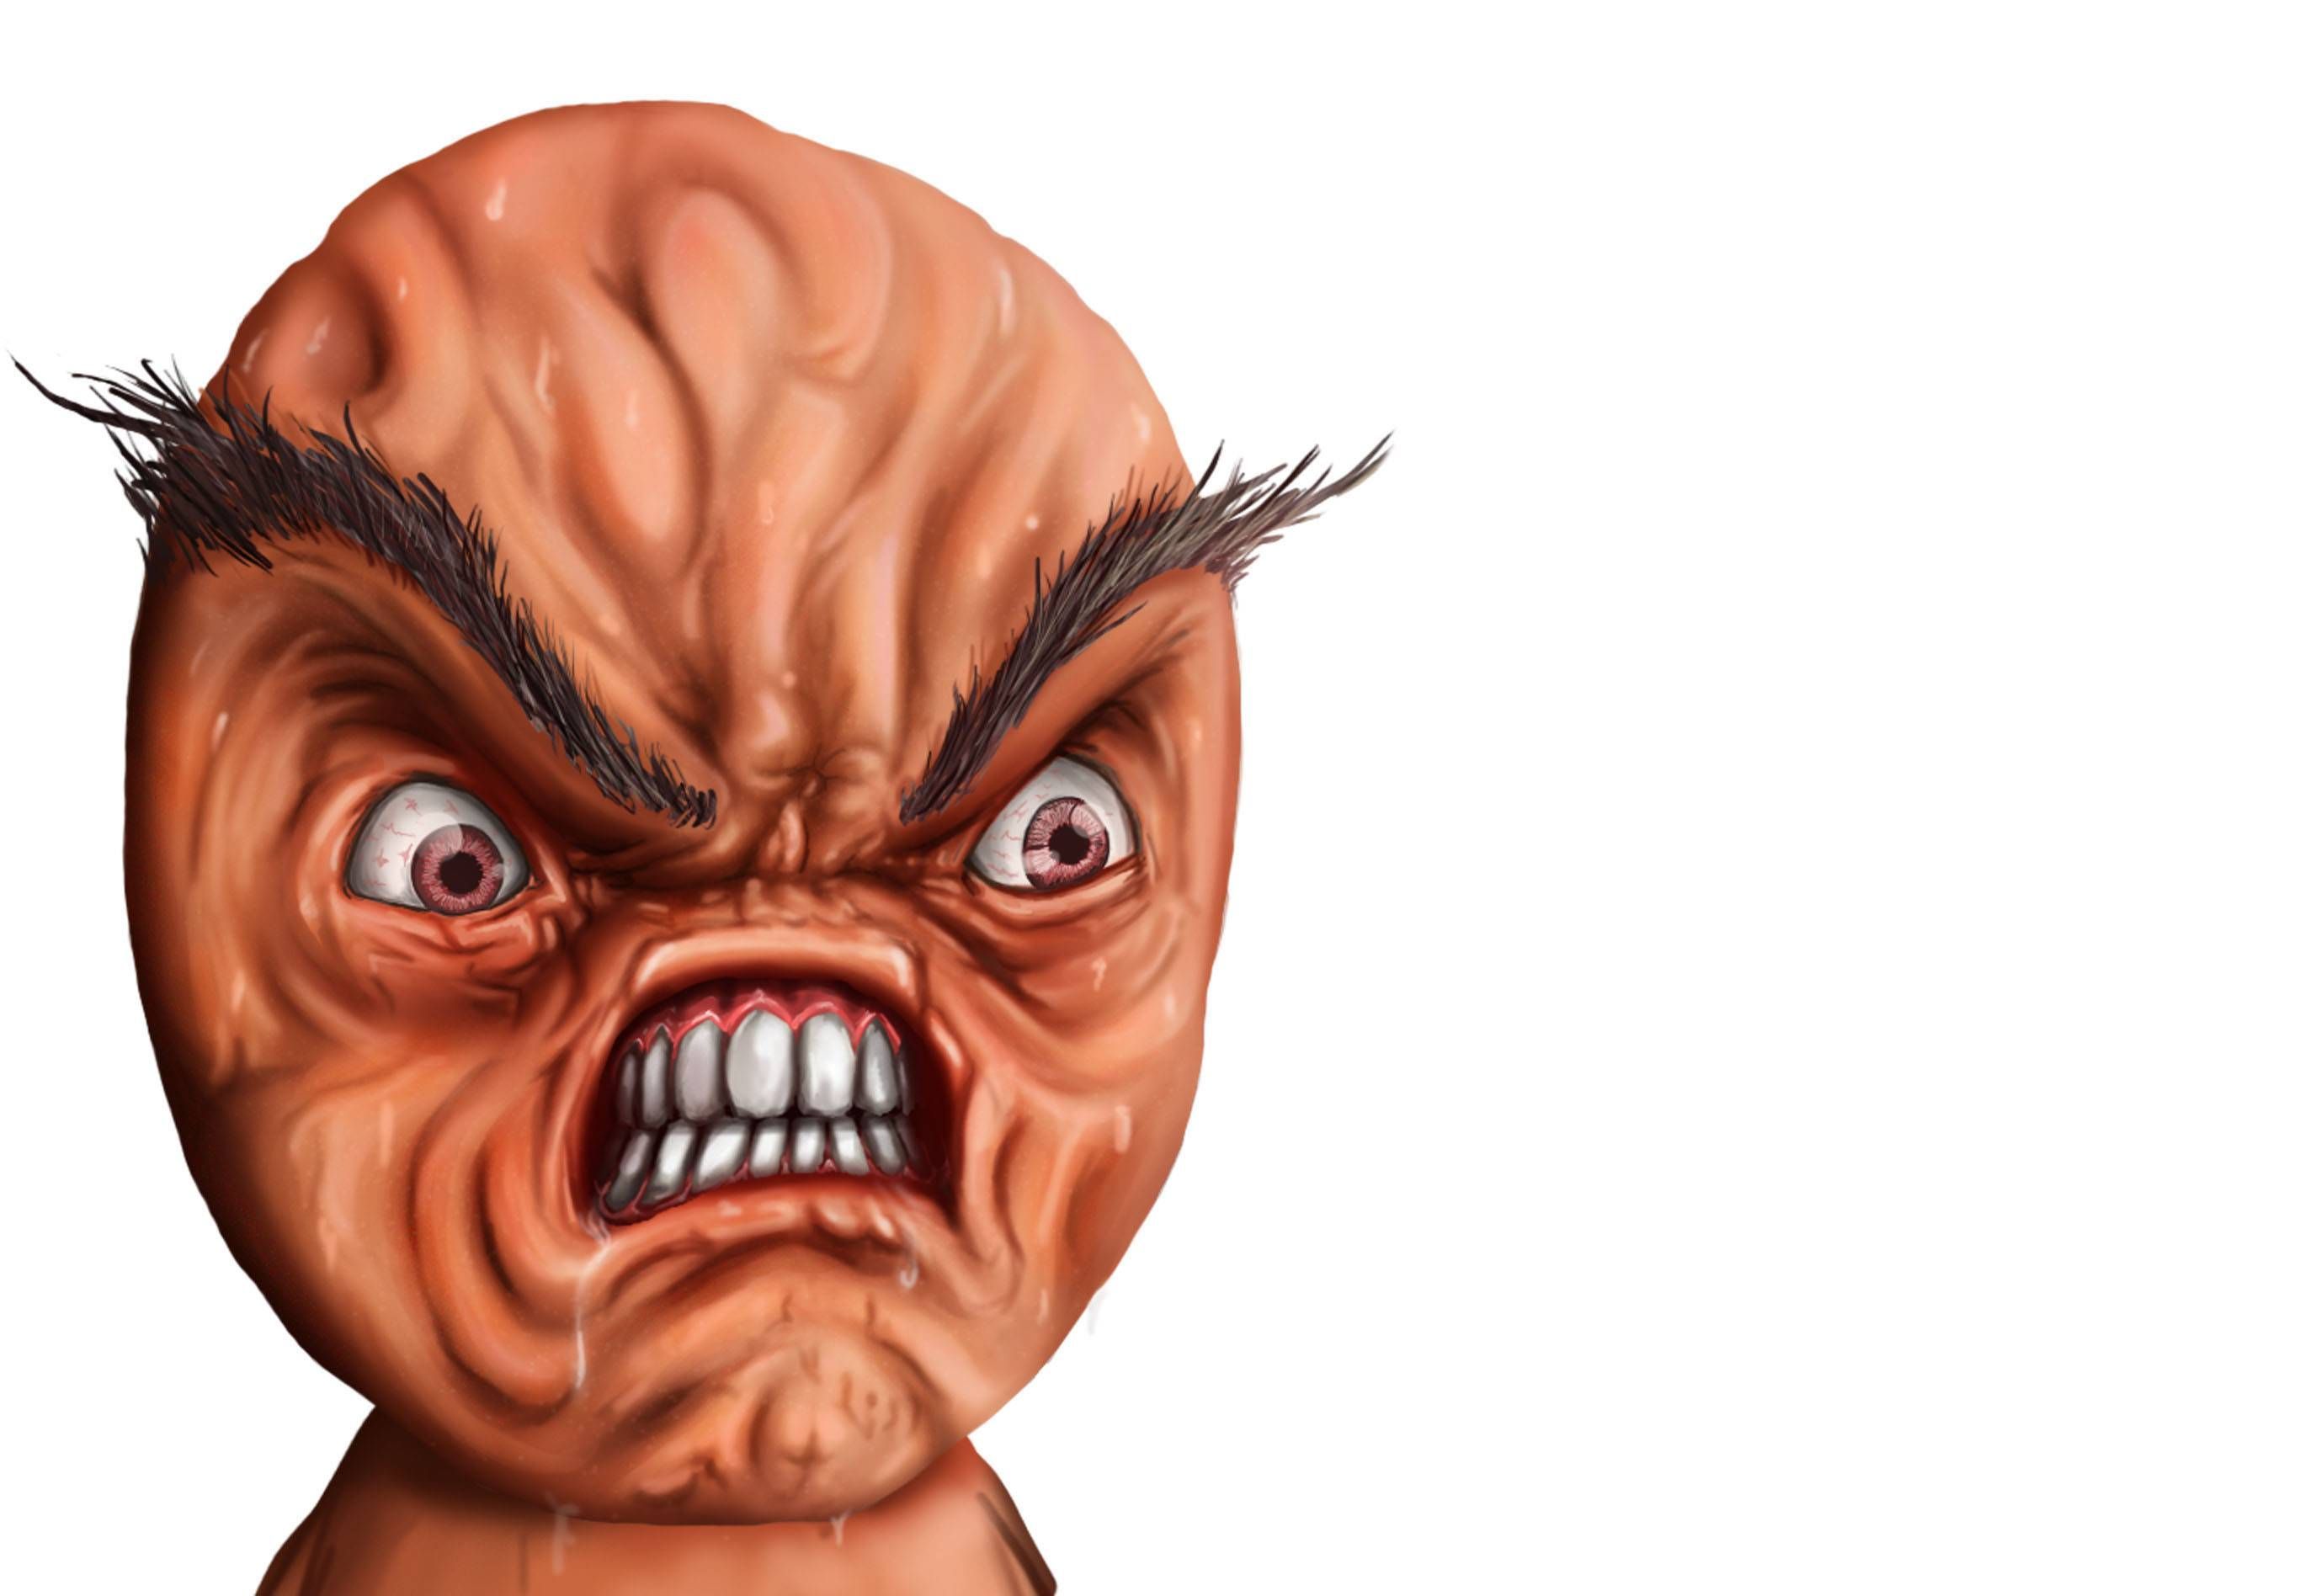 Face rage wallpaper - (#7697) - High Quality and Resolution ...